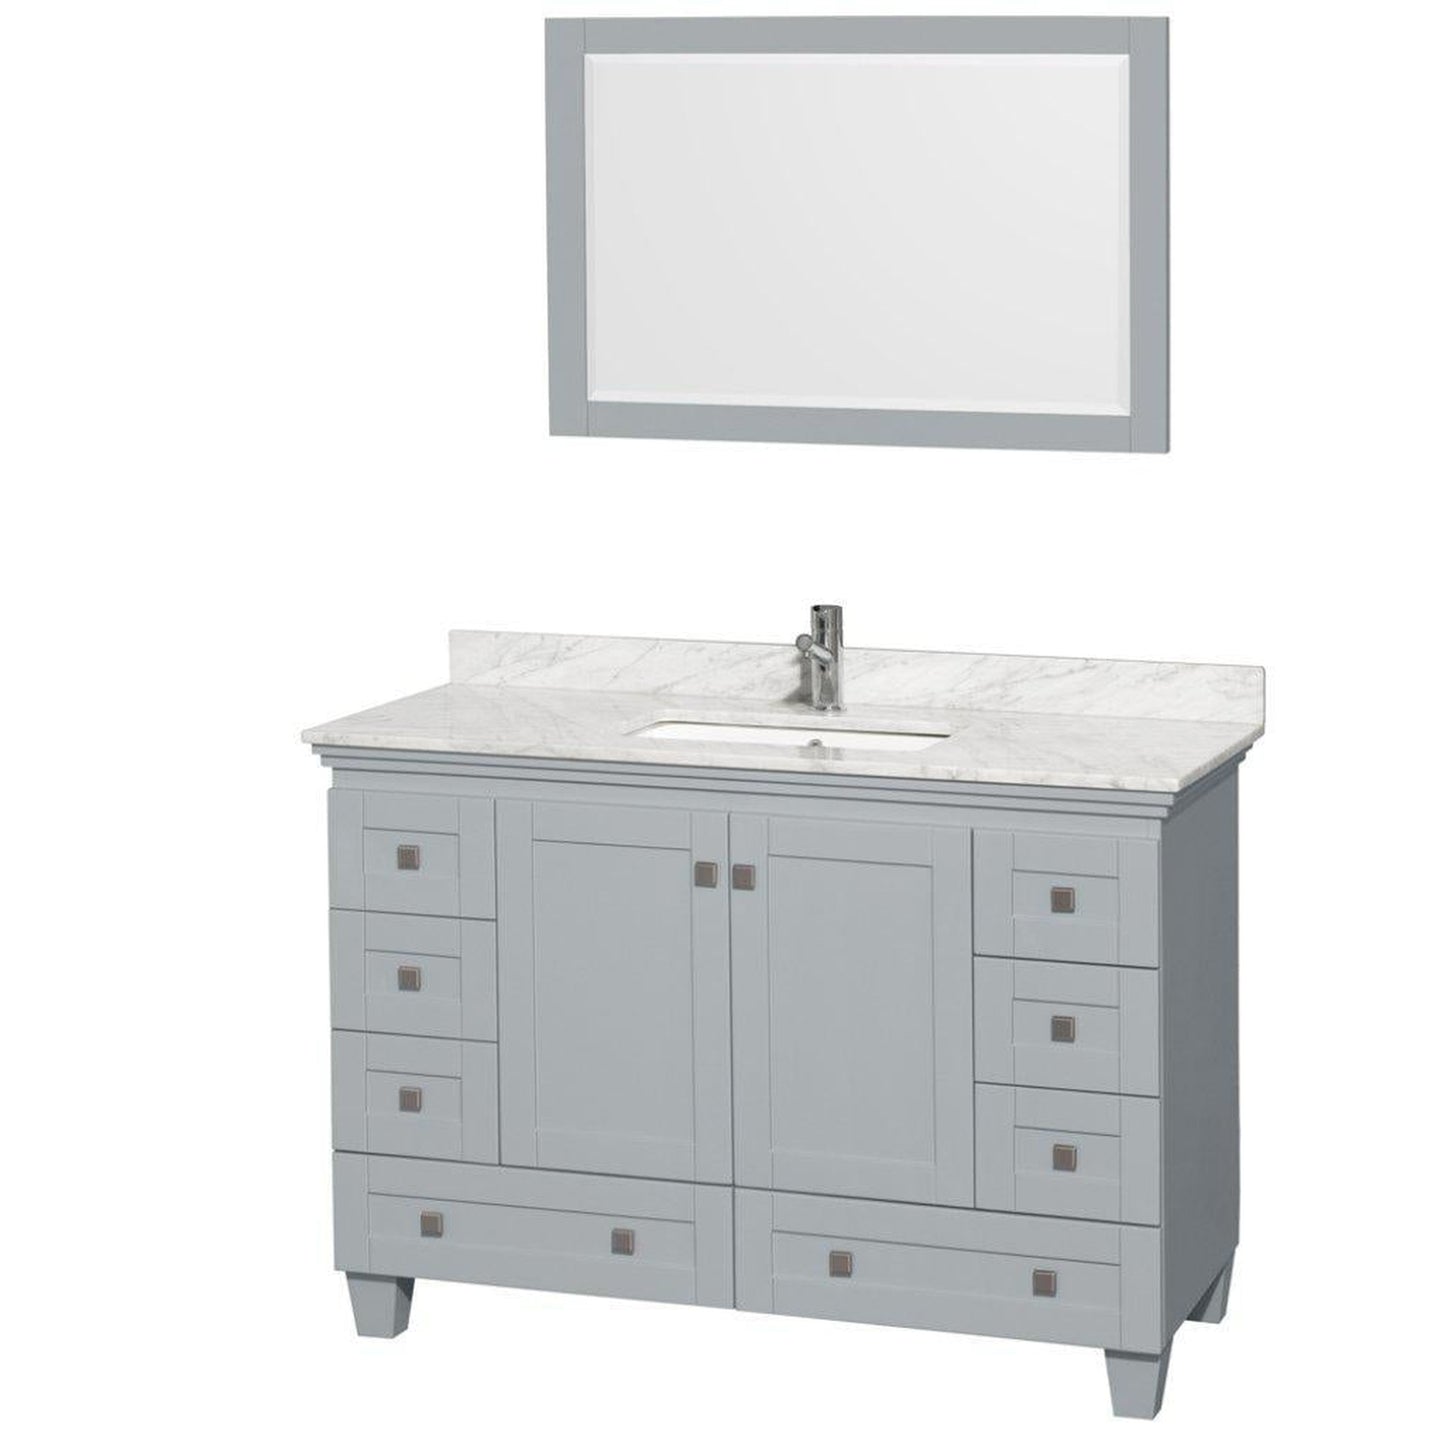 Wyndham Collection Acclaim 48" Single Bathroom Oyster Gray Vanity Set With White Carrara Marble Countertop And Undermount Square Sink And 24" Mirror